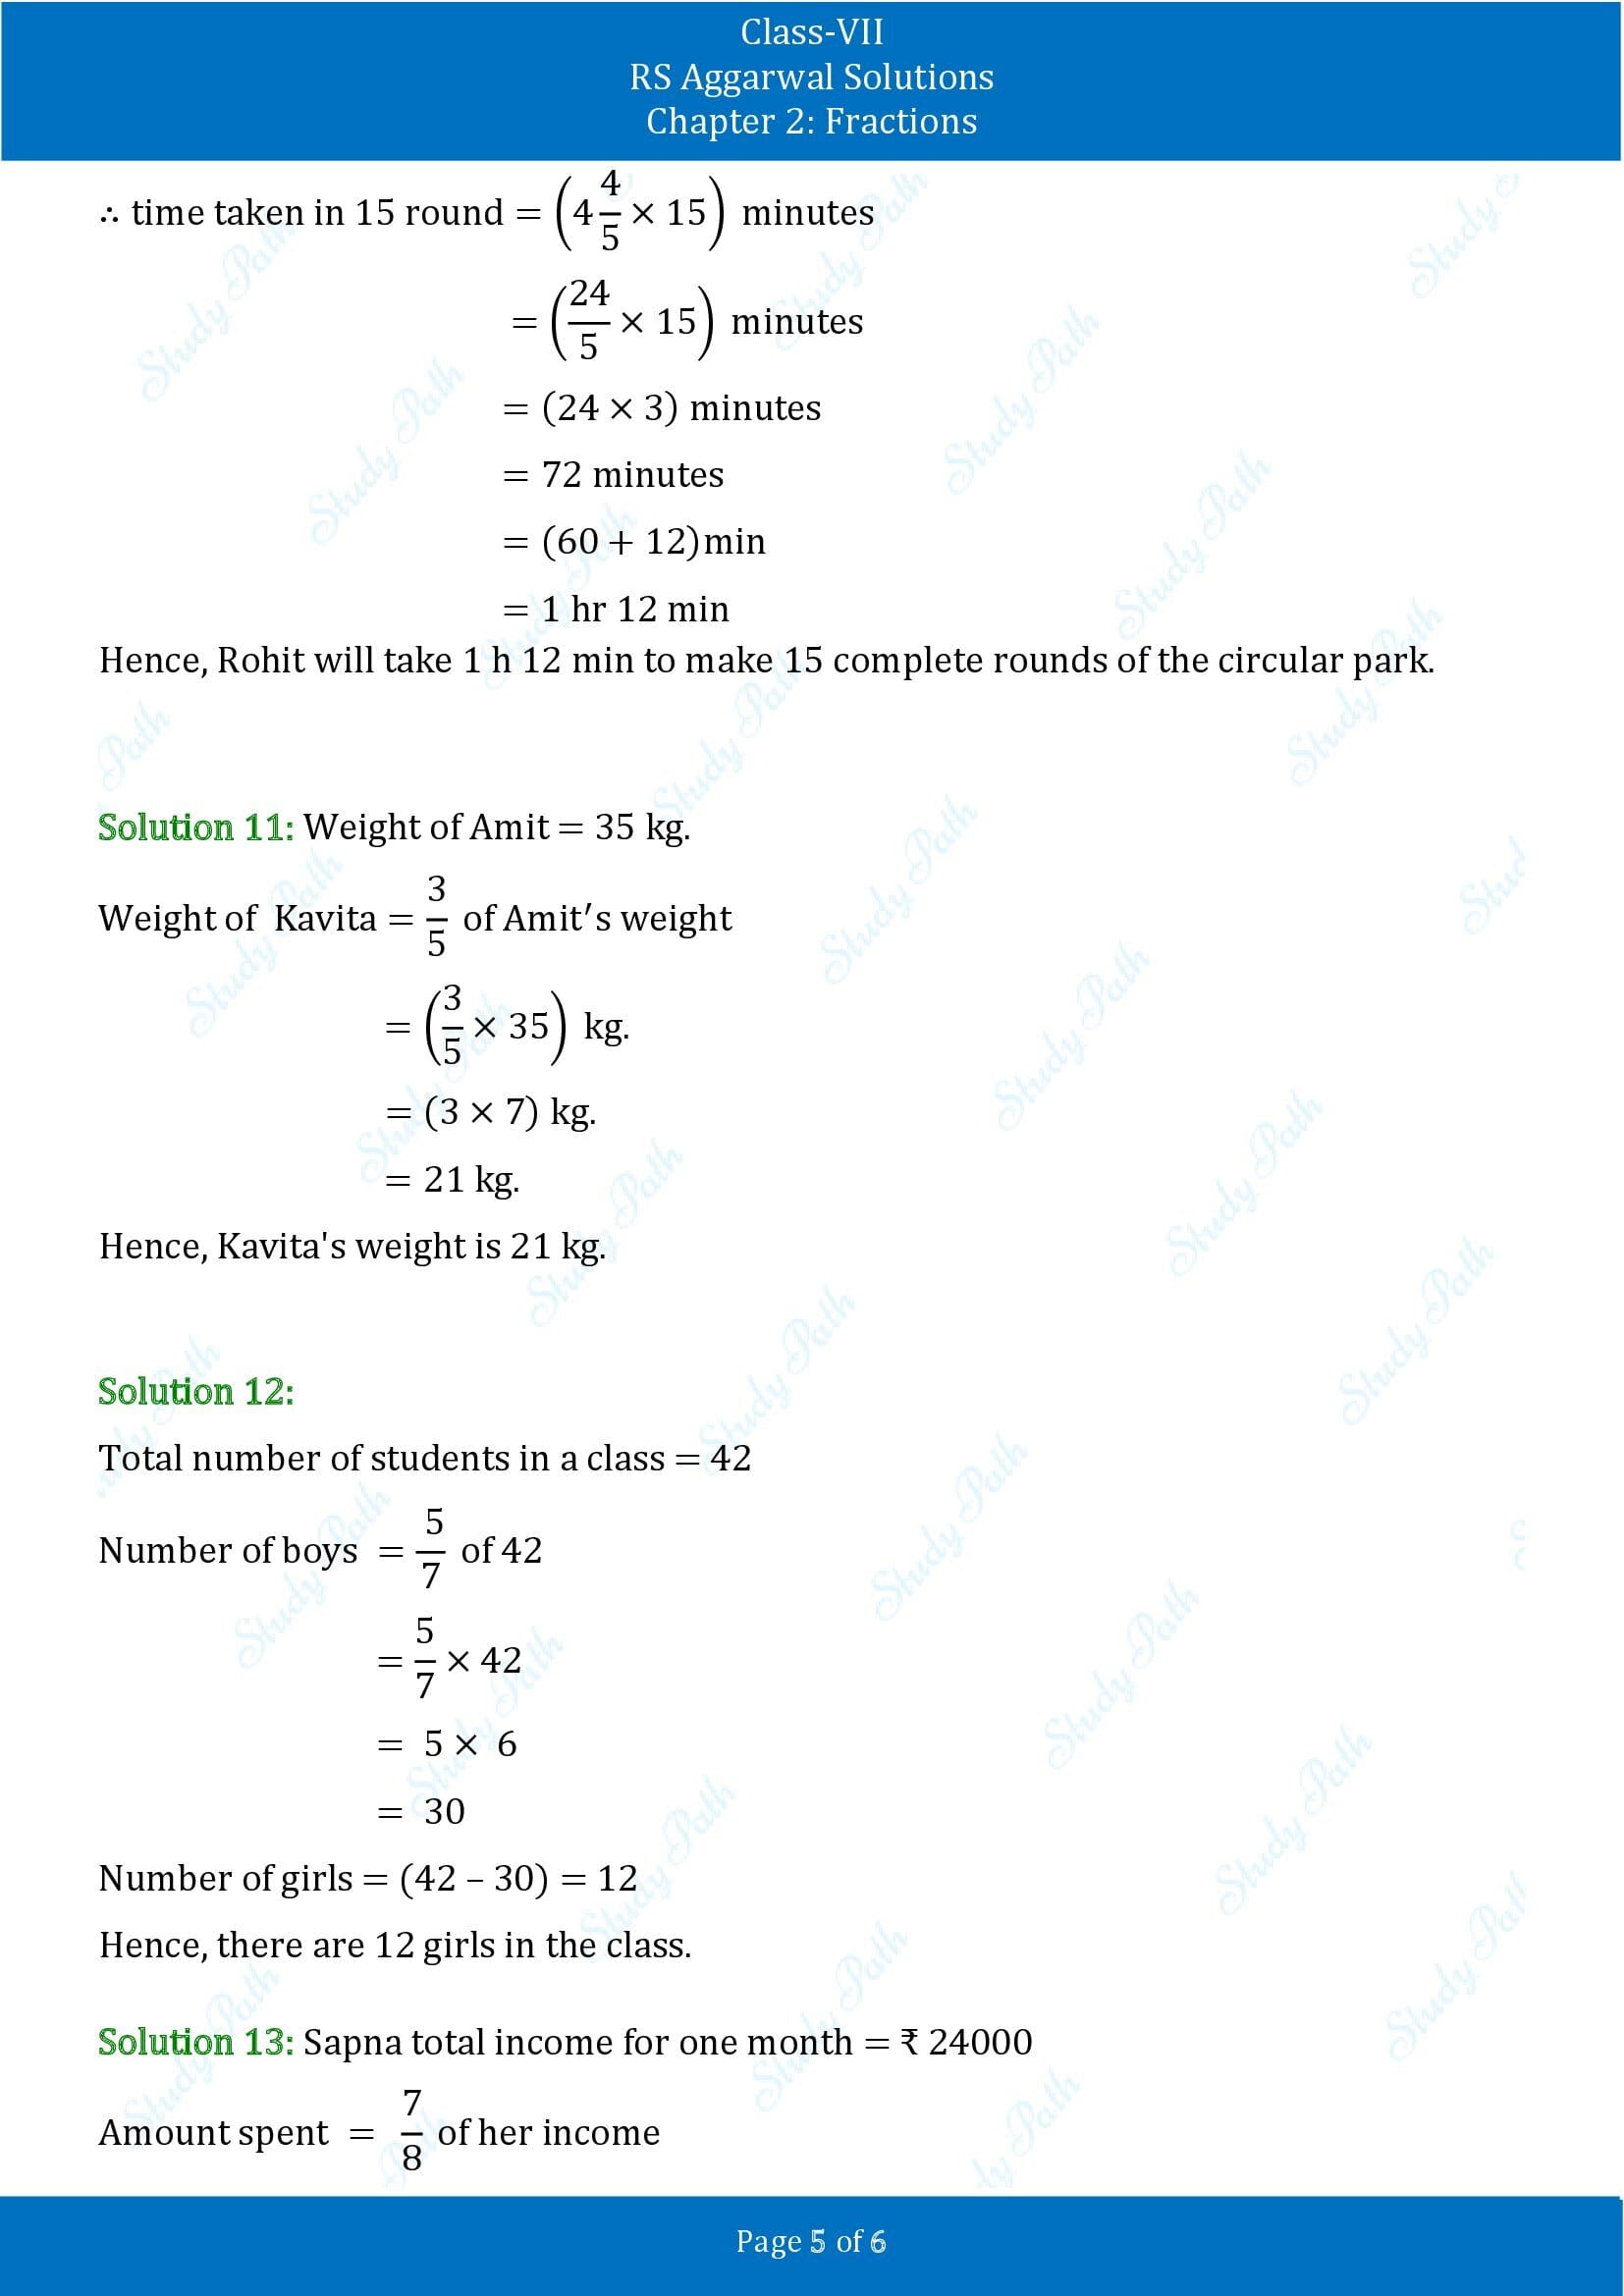 RS Aggarwal Solutions Class 7 Chapter 2 Fractions Exercise 2B 00005